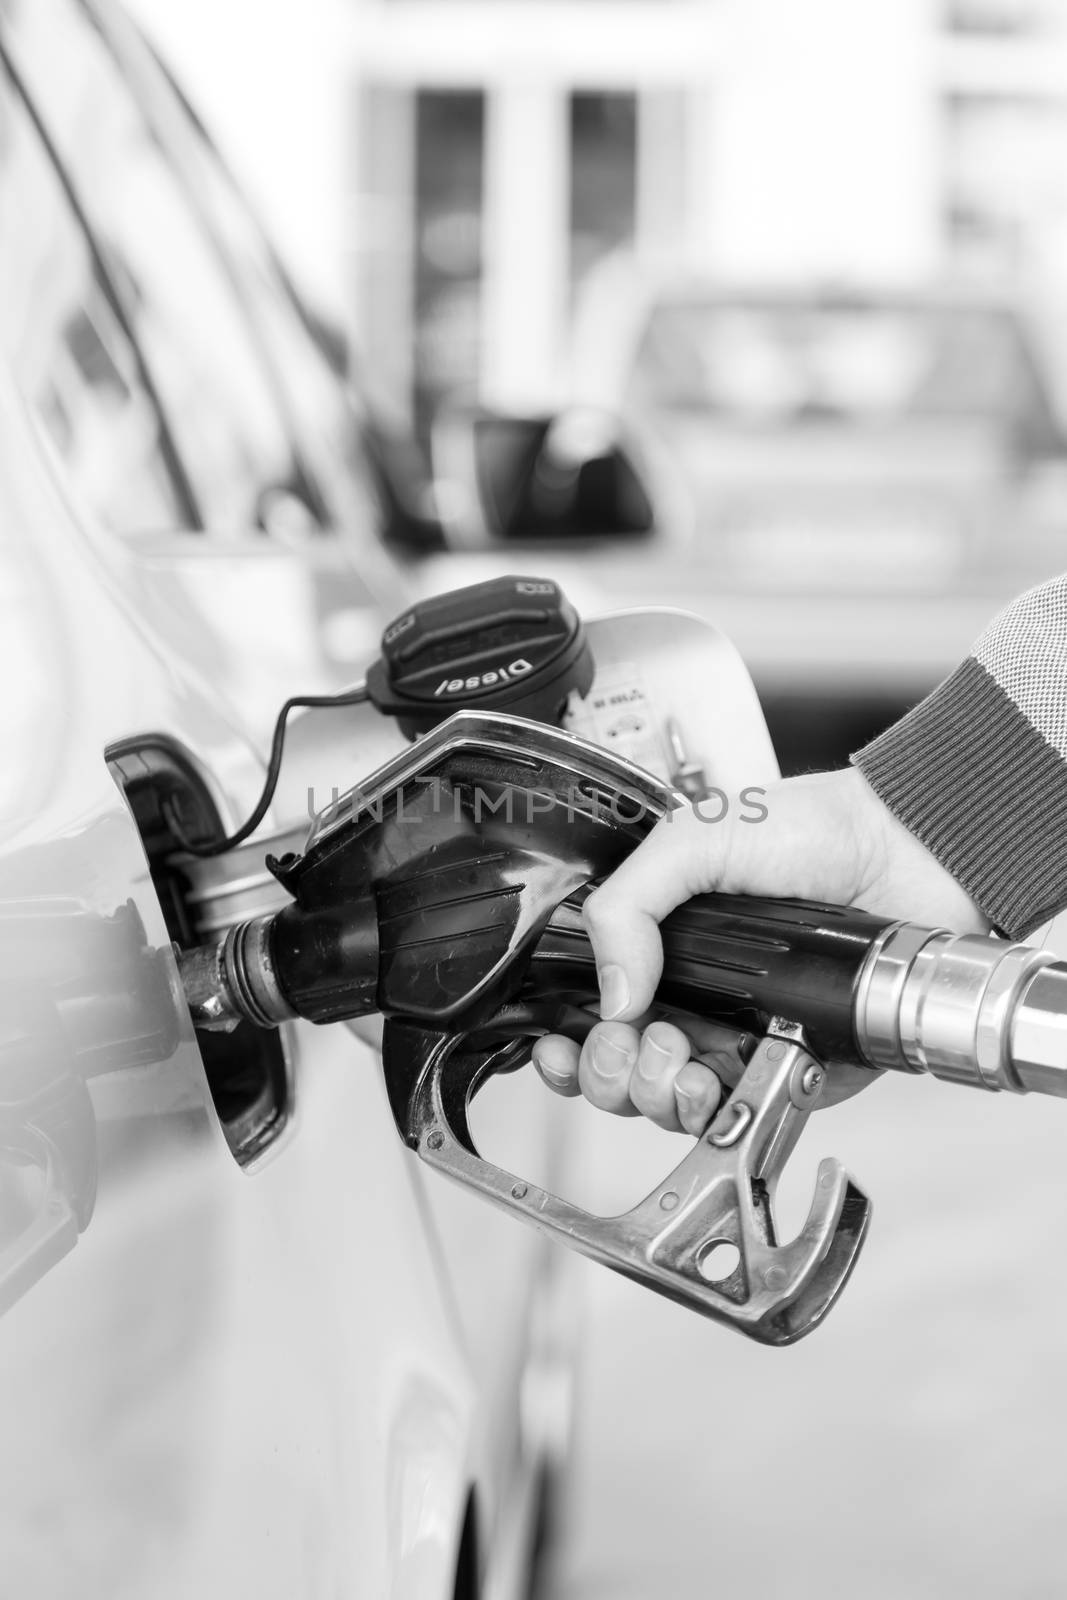 Pumping gas at gas pump. Closeup of man pumping gasoline fuel in car at gas station. Black and white image.